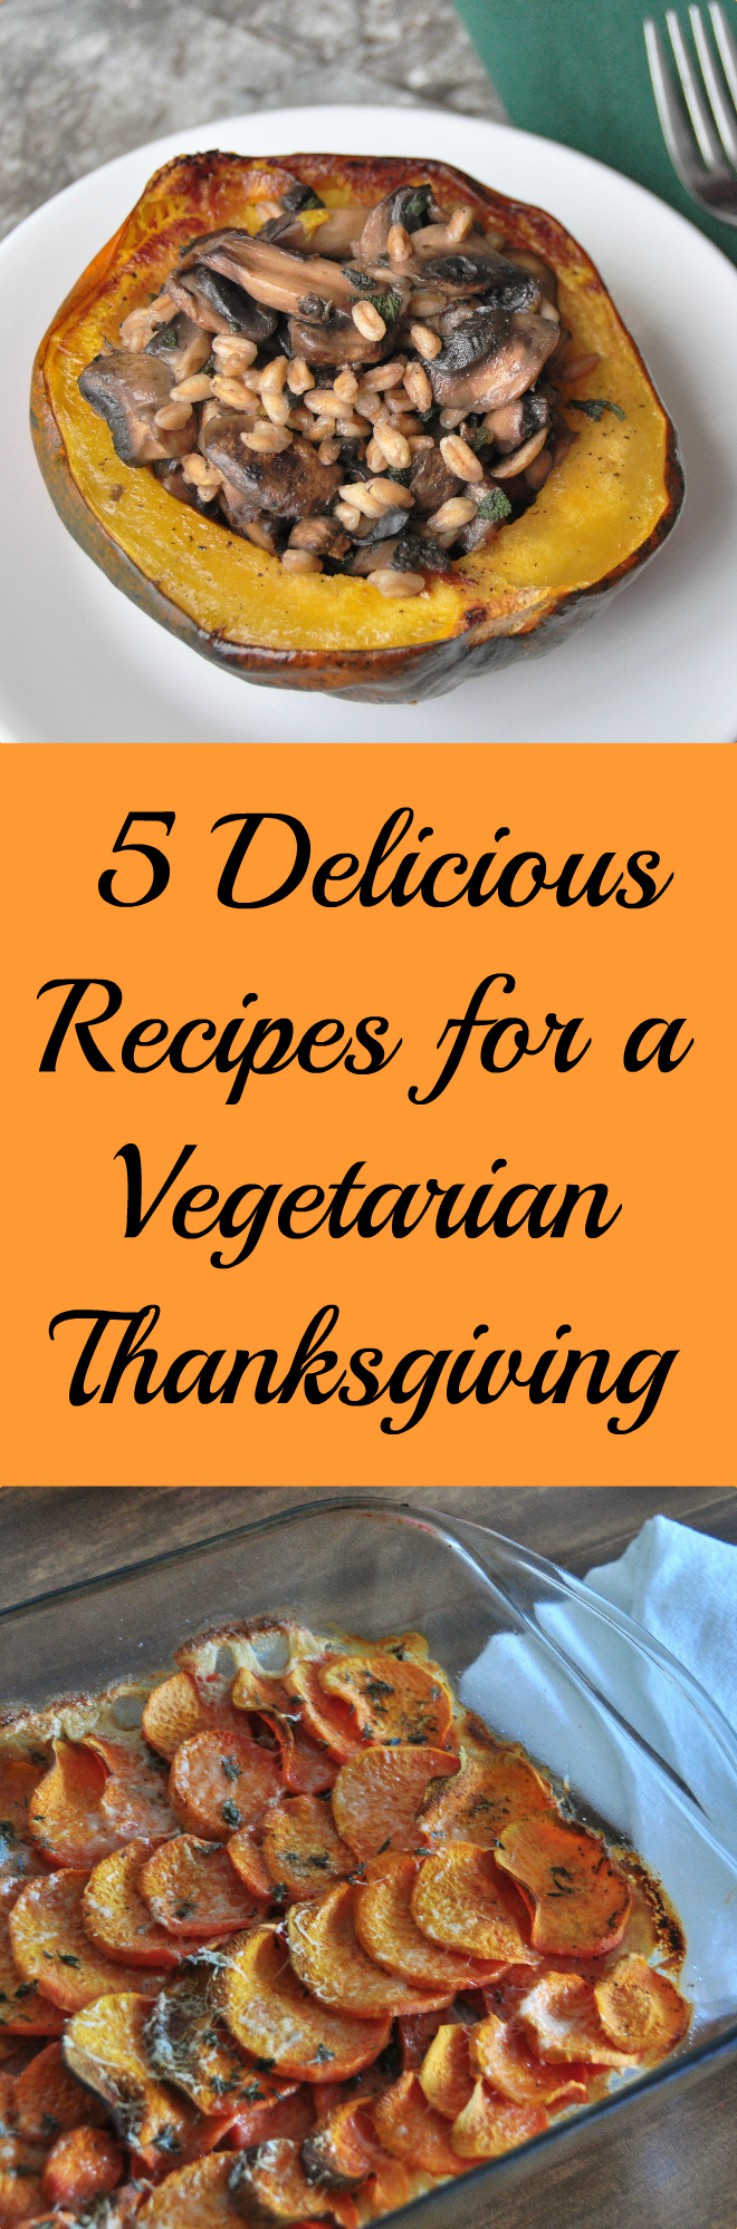 5 Delicious Recipes for a Vegetarian Thanksgiving | Tangled Up In Food